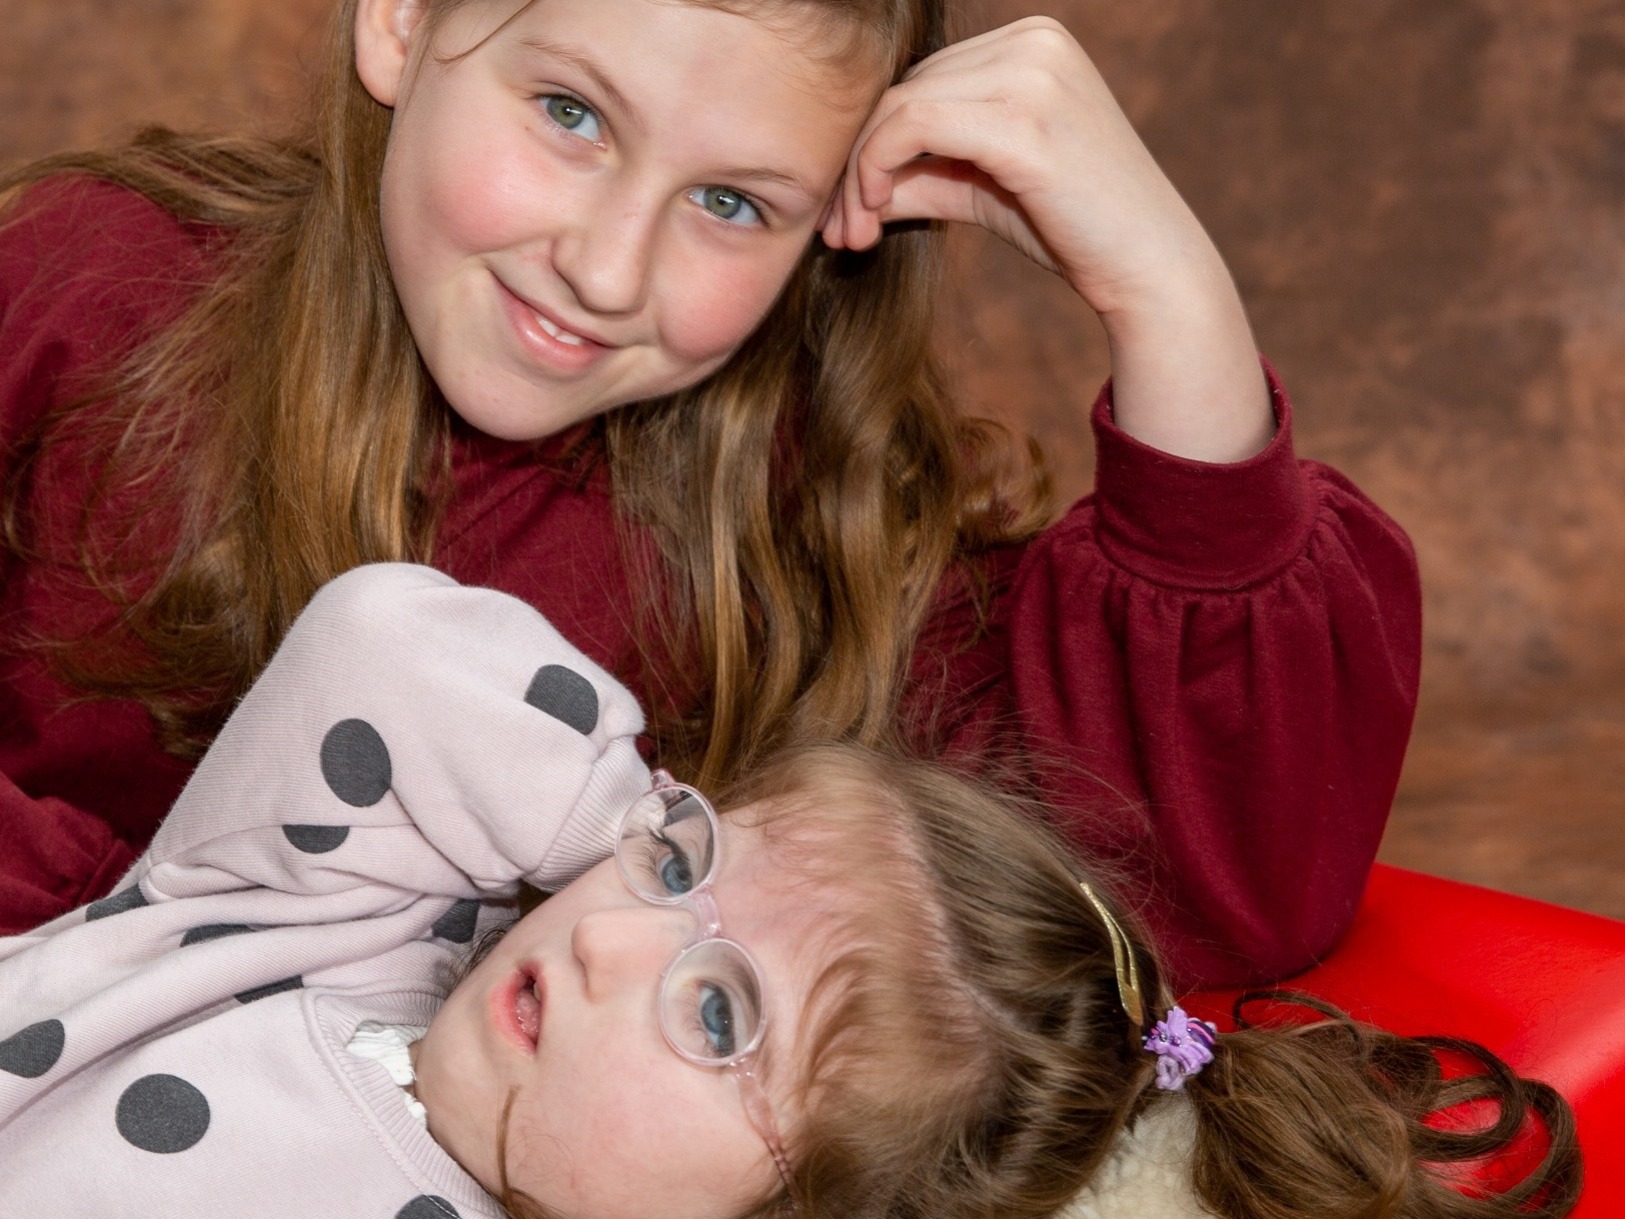 A young girl with a medical condition having a photograph with her sister whilst visiting Hospice Care